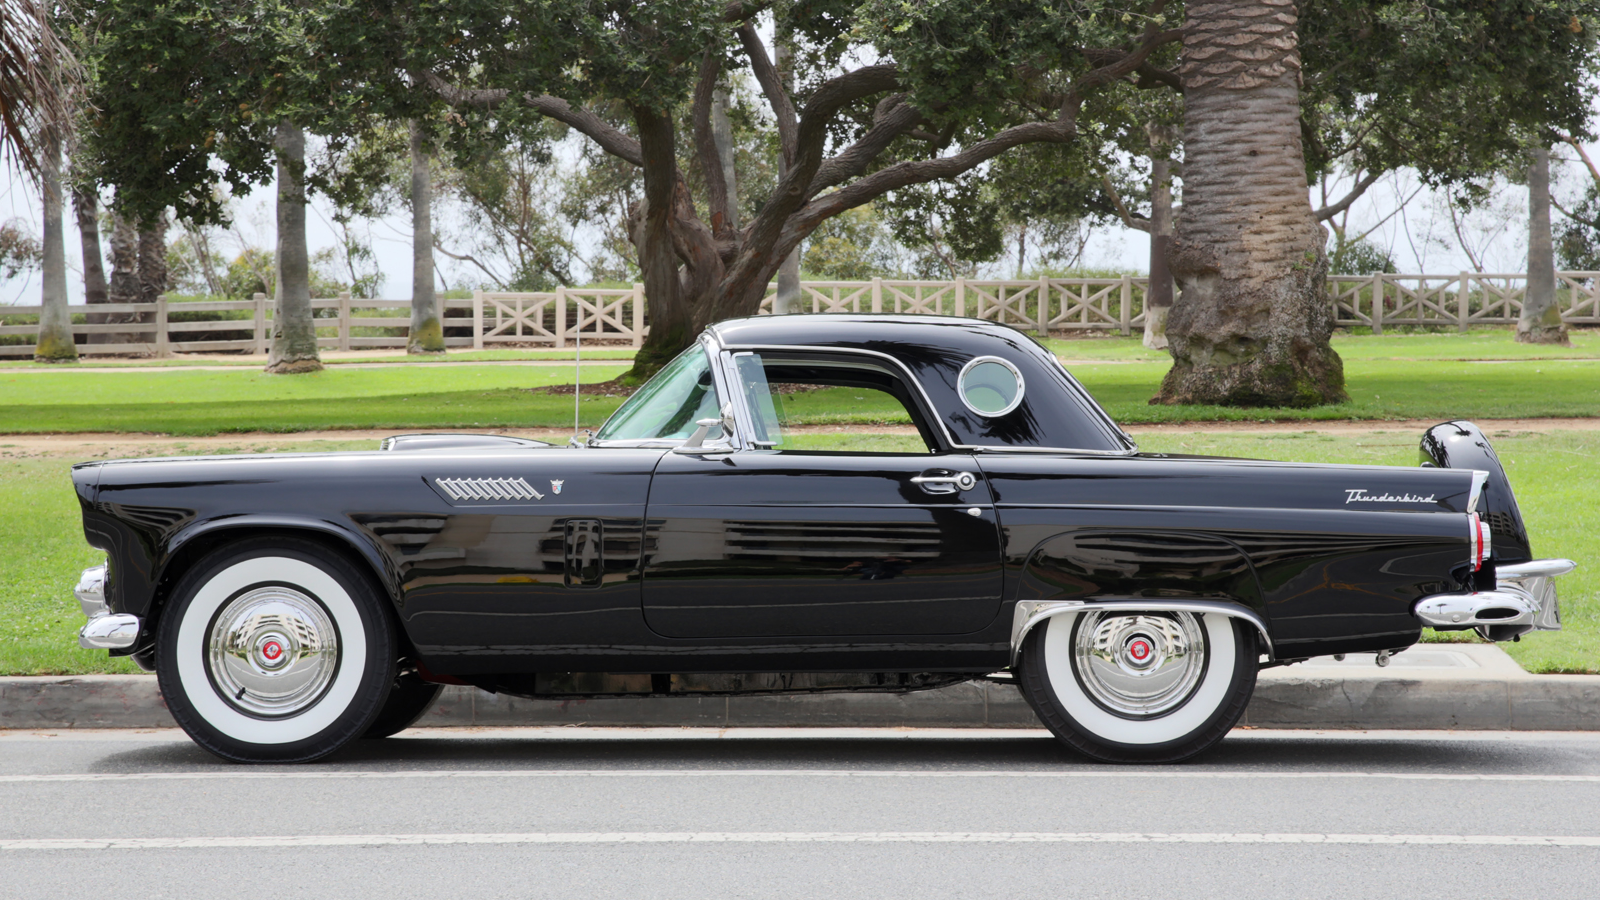 Marilyn Monroe’s Ford Thunderbird heads to auction for the first time ever